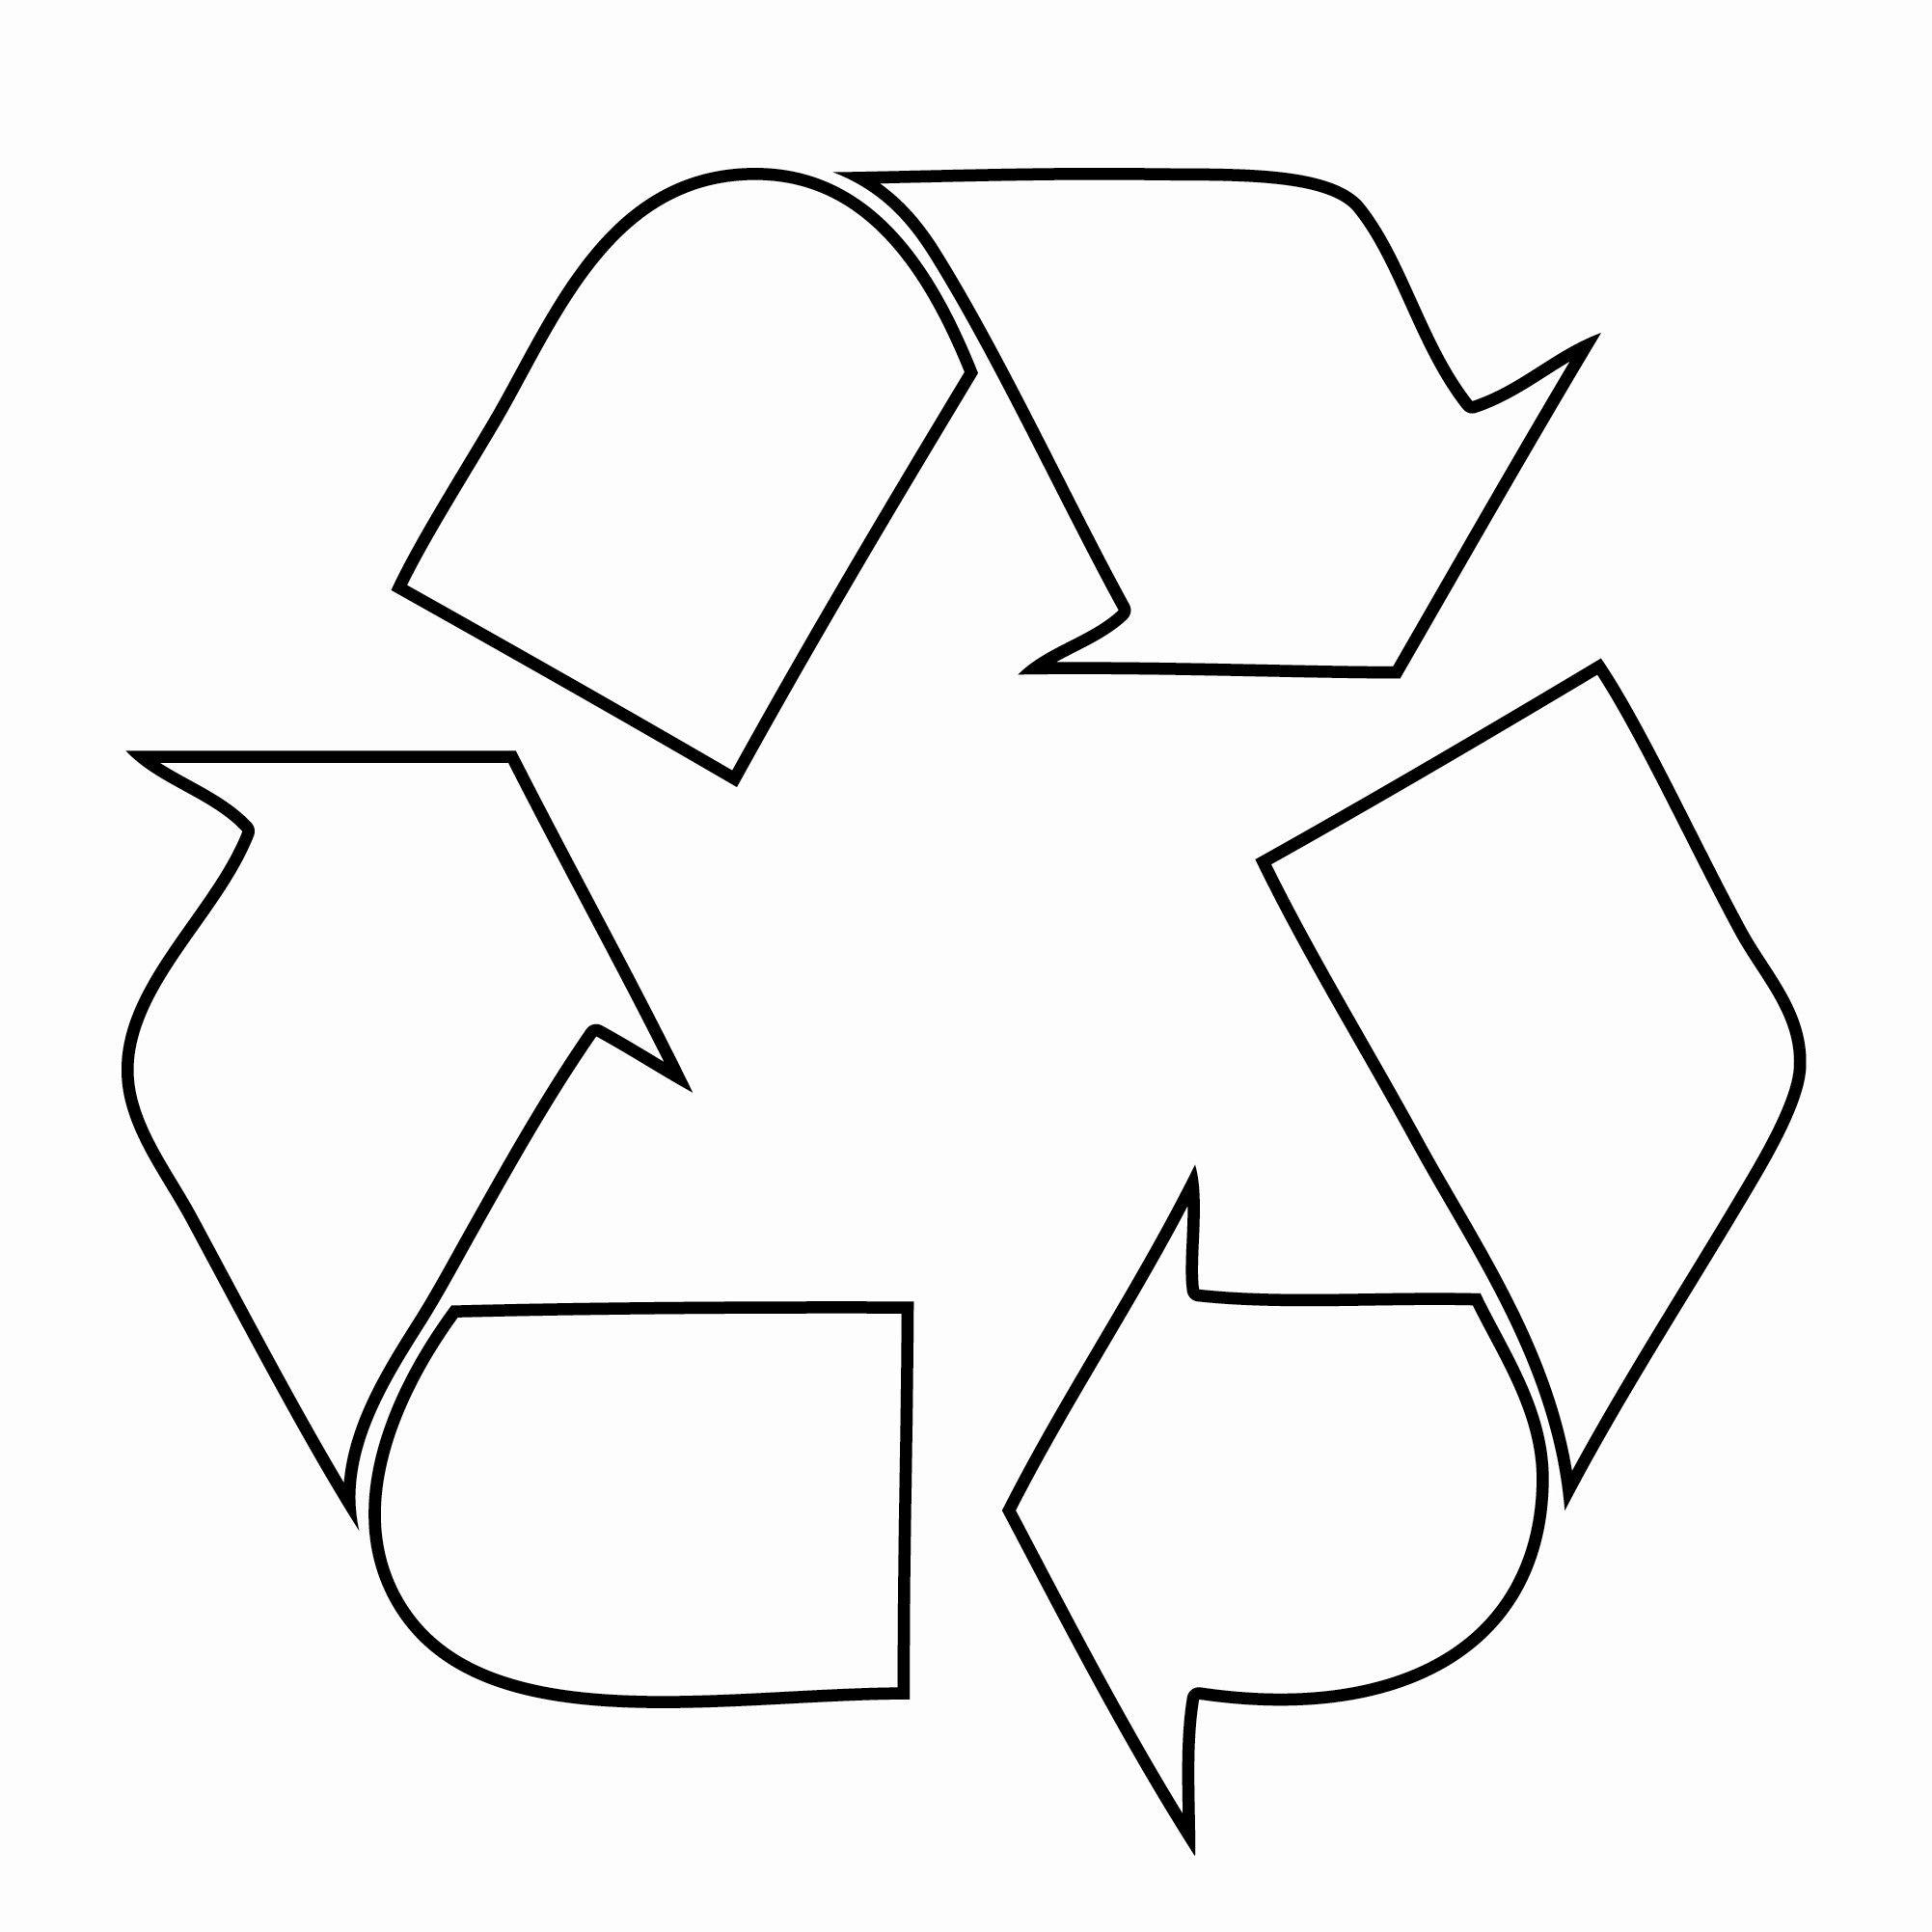 White Recycle Logo - Free Recycle Symbol, Download Free Clip Art, Free Clip Art